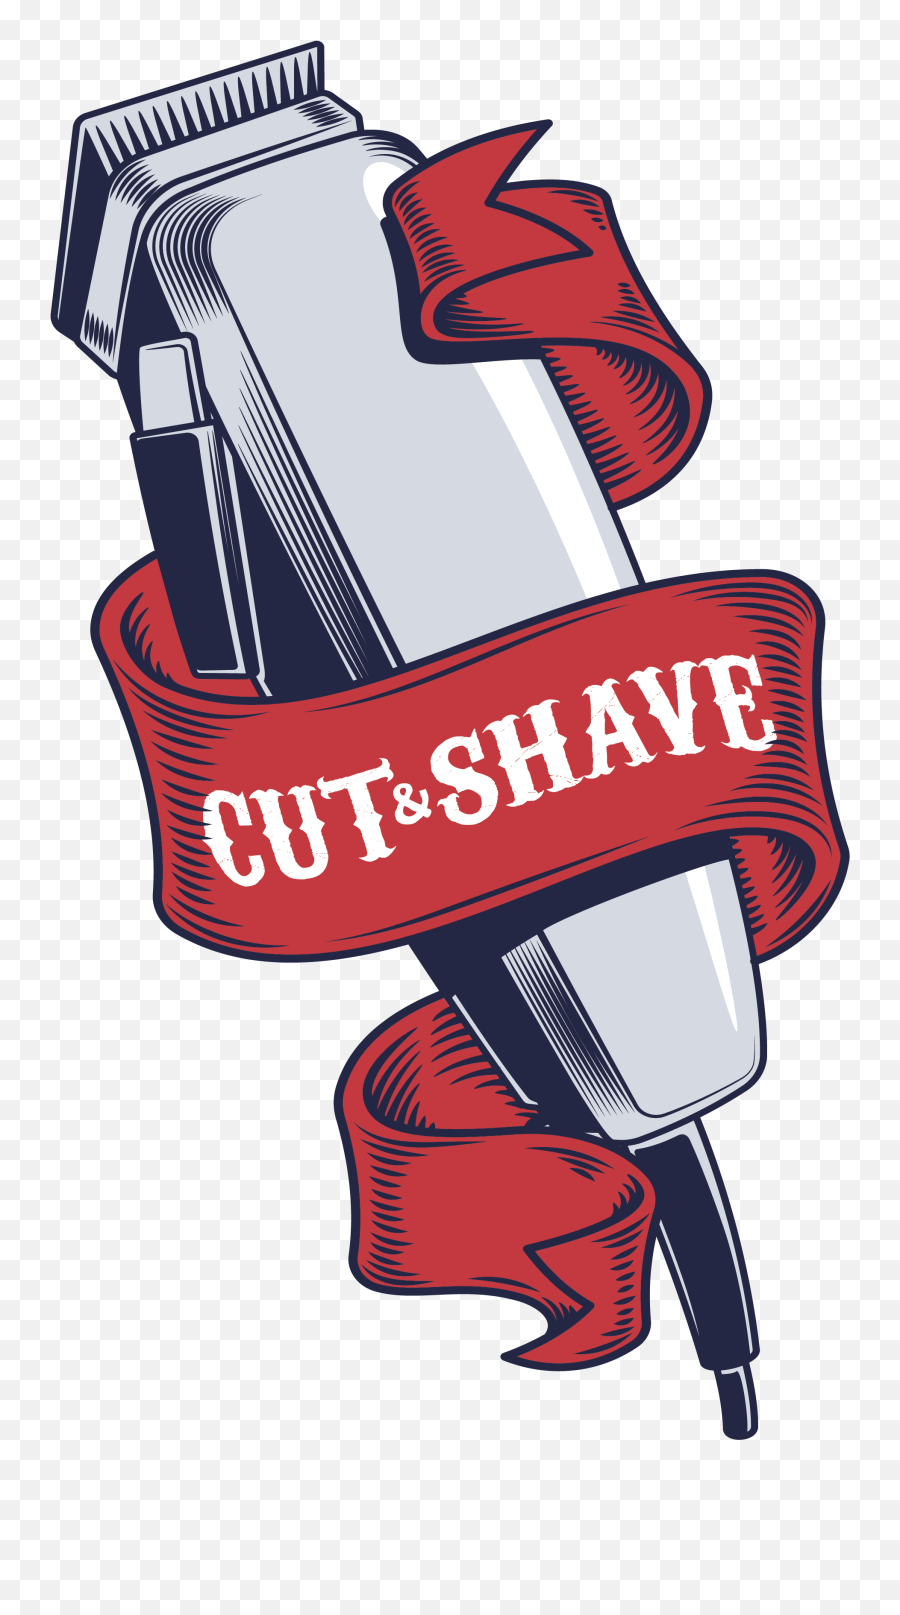 Download Hd Picture Transparent Hair Clipper Shaving - Transparent Barber Shop Logo Png,Barber Shop Logo